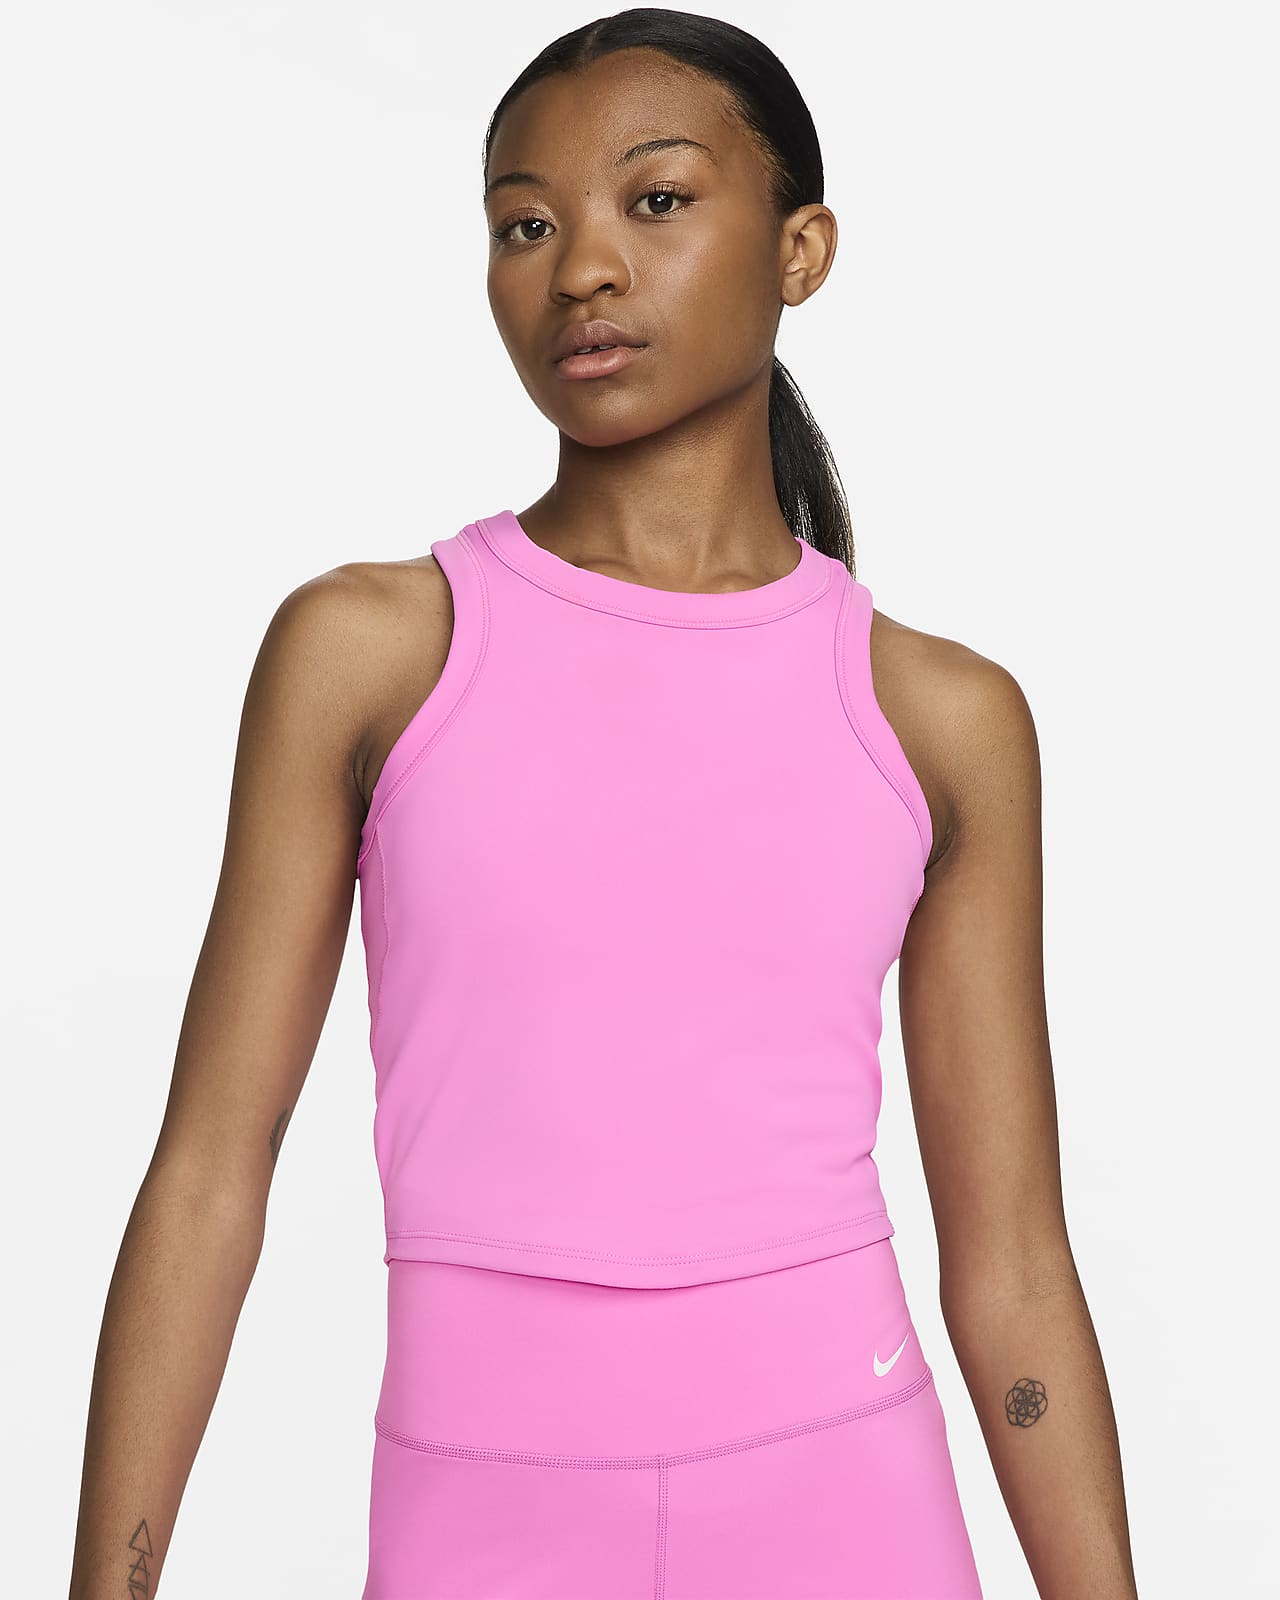 Nike Dri-FIT One Tank Top active pink Women's (plus size) 1x